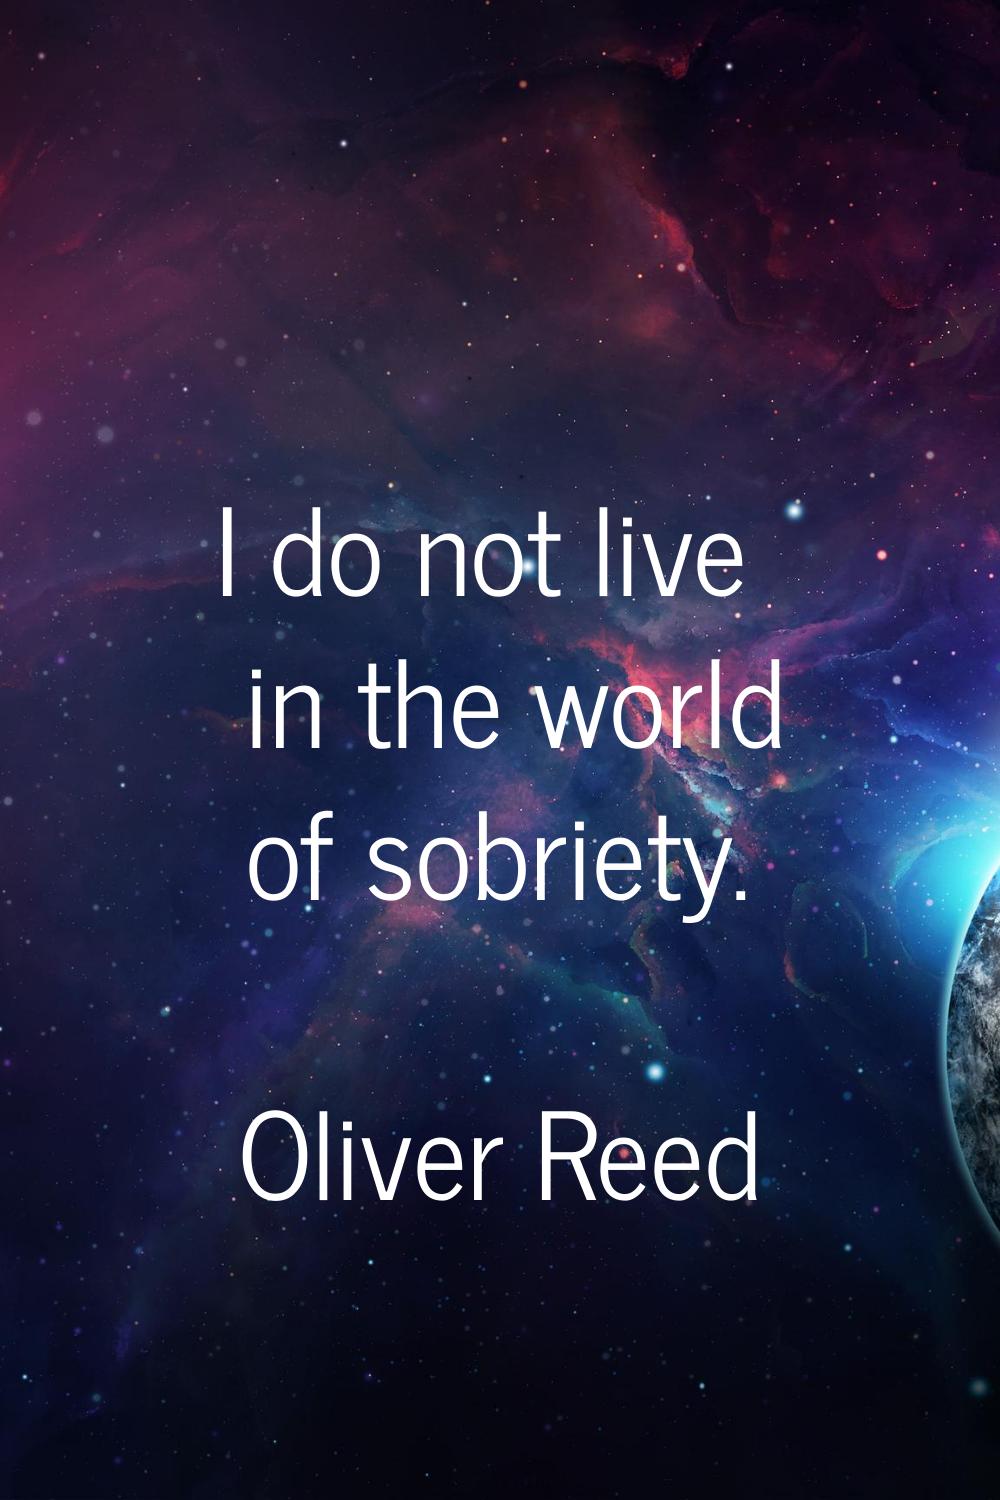 I do not live in the world of sobriety.